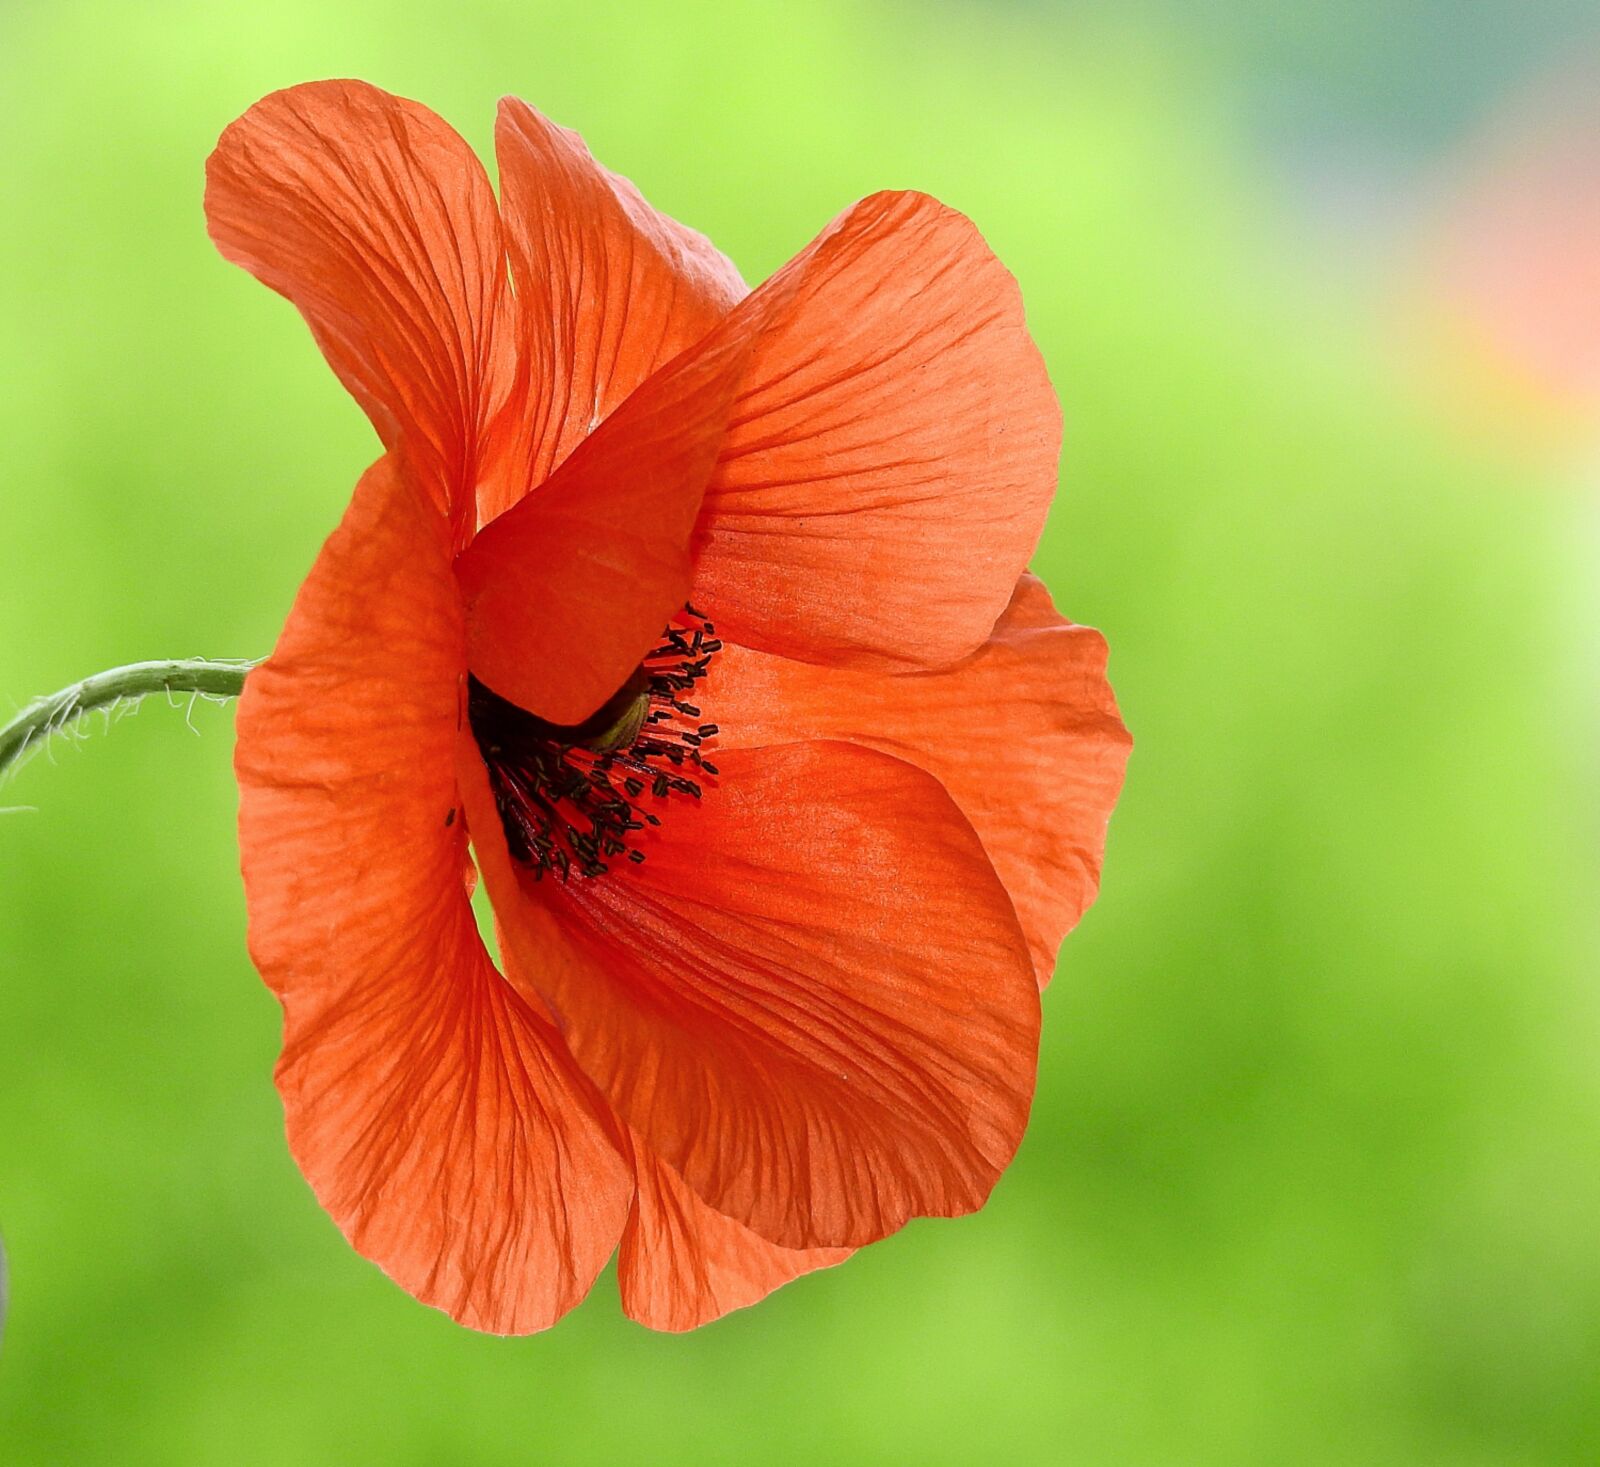 Nikon Coolpix P900 sample photo. Poppy flower, nature, red photography